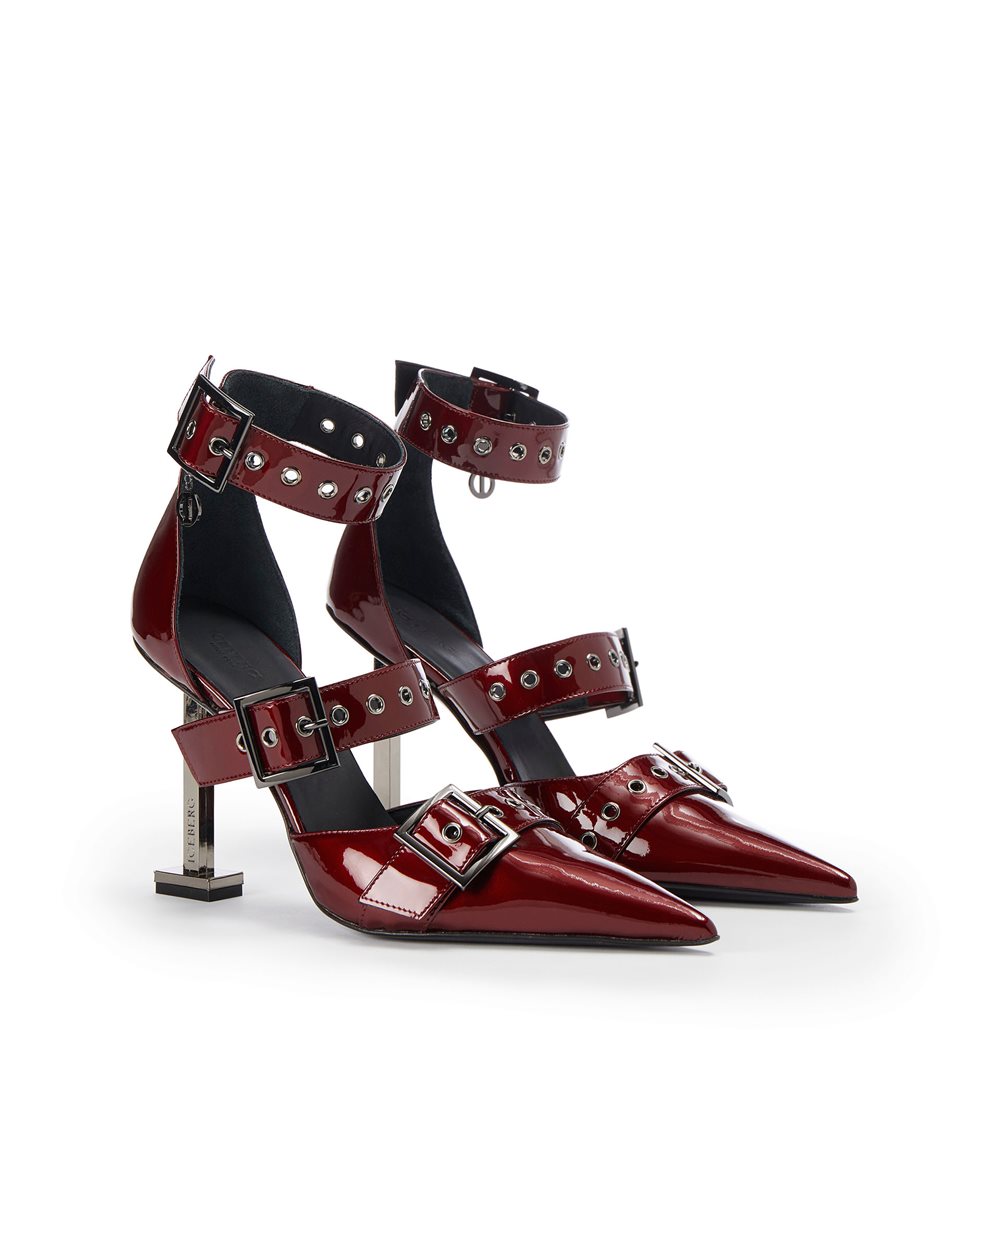 Pumps with iconic heel - Iceberg - Official Website